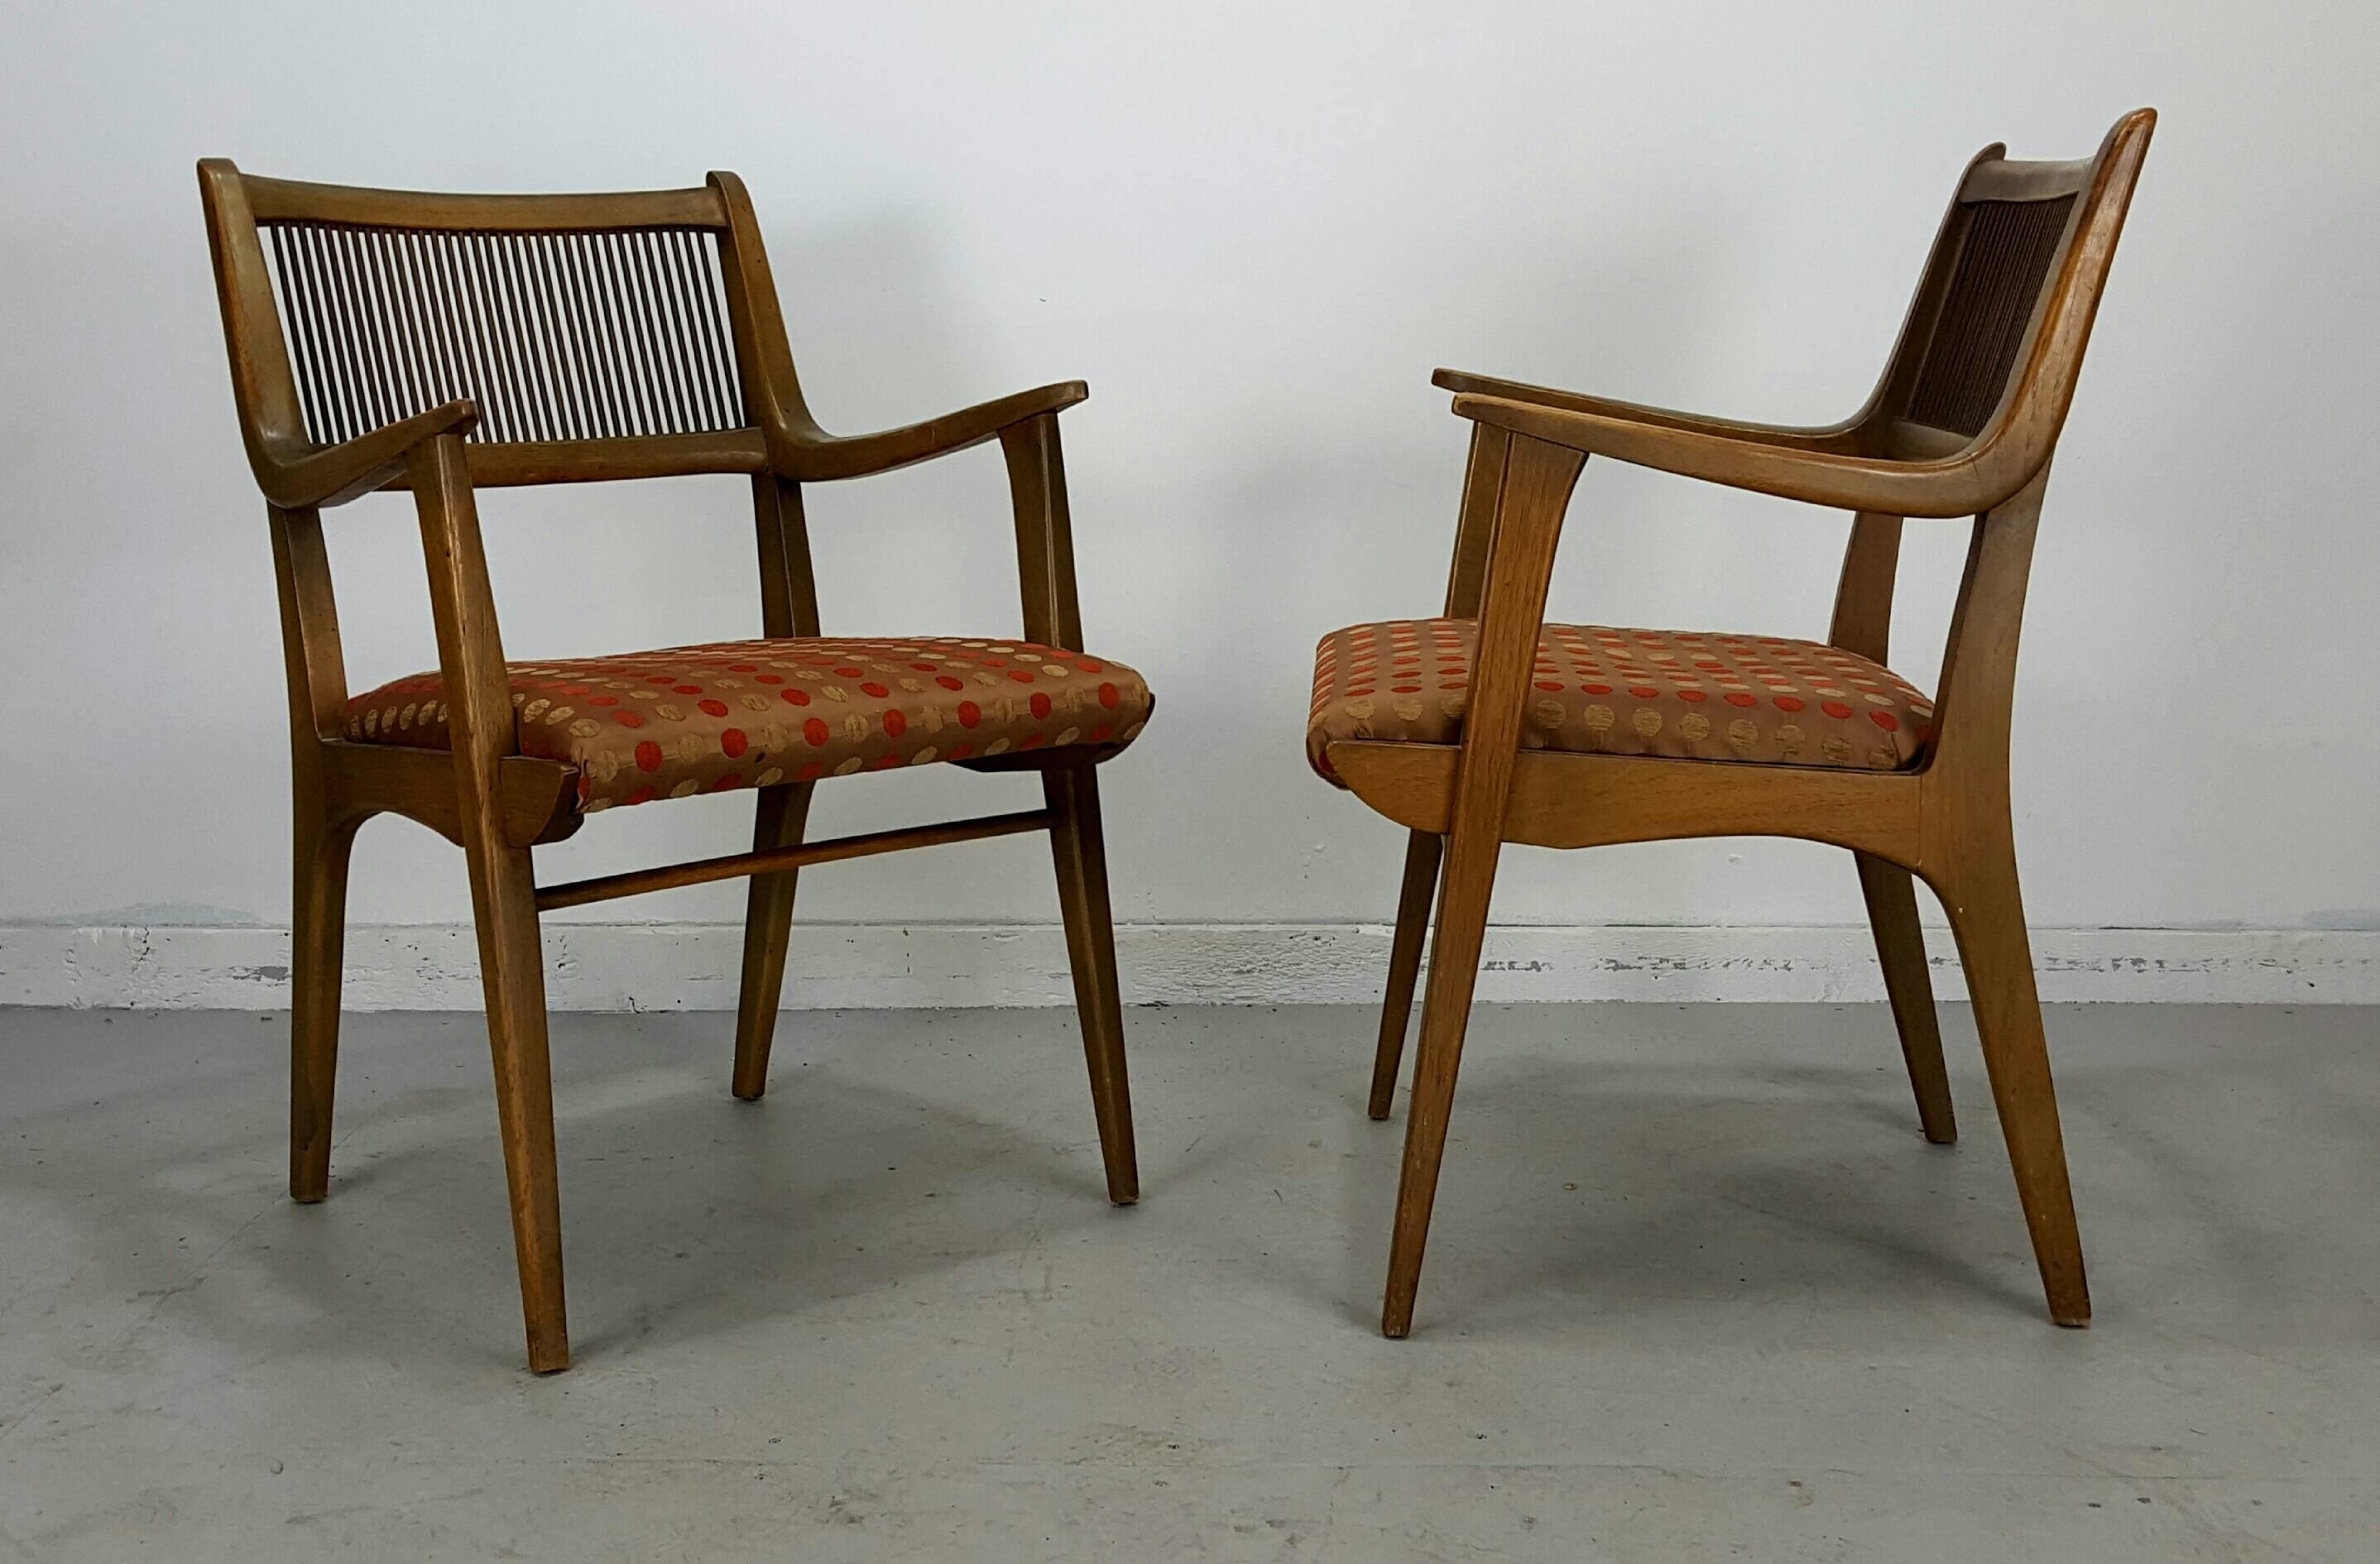 Set of eight Modernist dining chairs designed by John Van Koert for Drexel's profile. Set includes six side chairs and two armchairs, Classic Mid-Century Modern design, Retains original fabric under newly upholstered contemporary fabric.